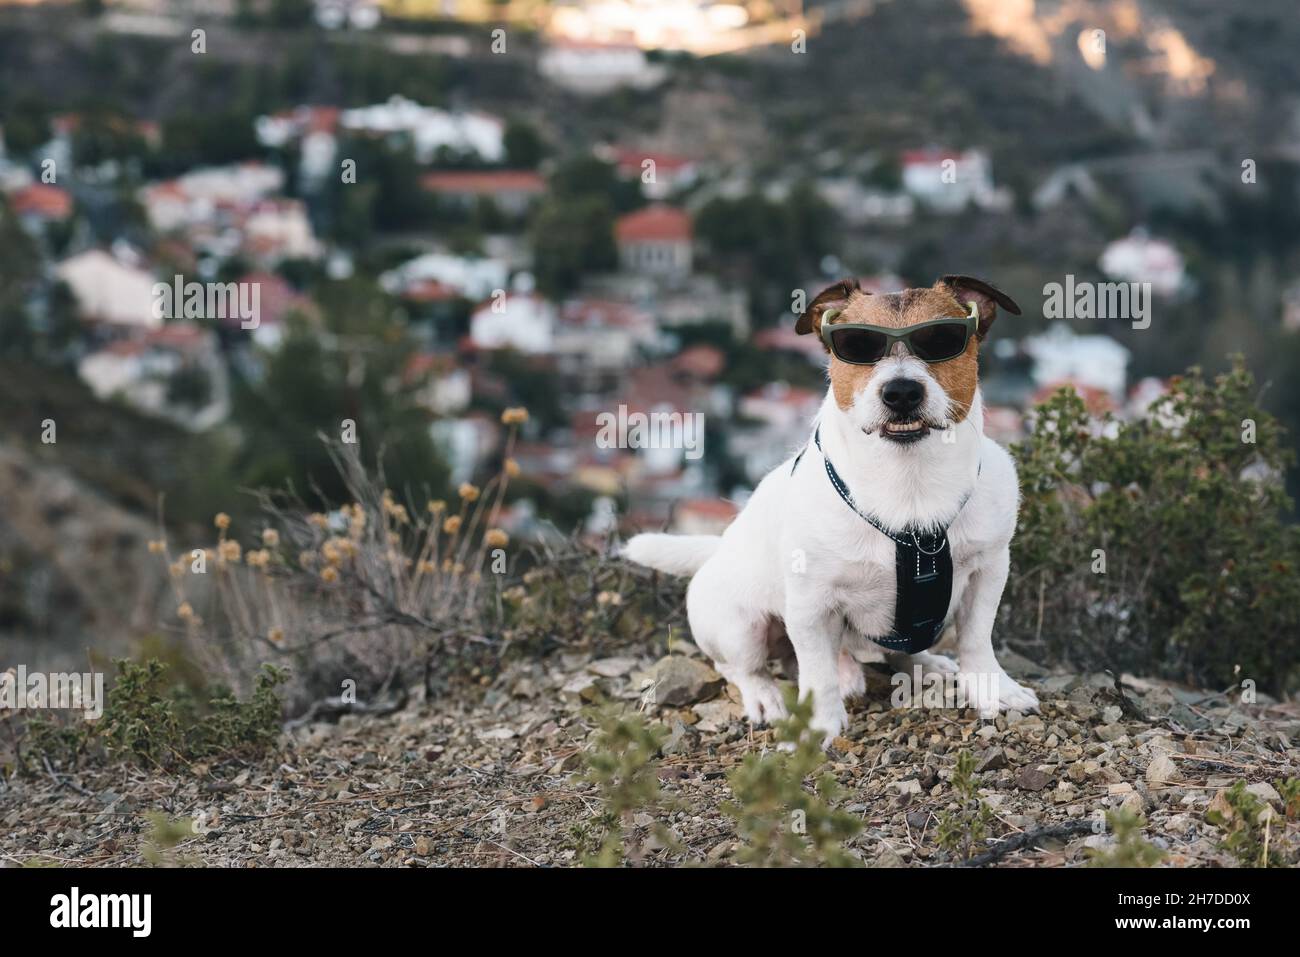 Dog with mean face wearing sunglasses looking like bandit. Dog snarling and barking guard its territory. Stock Photo